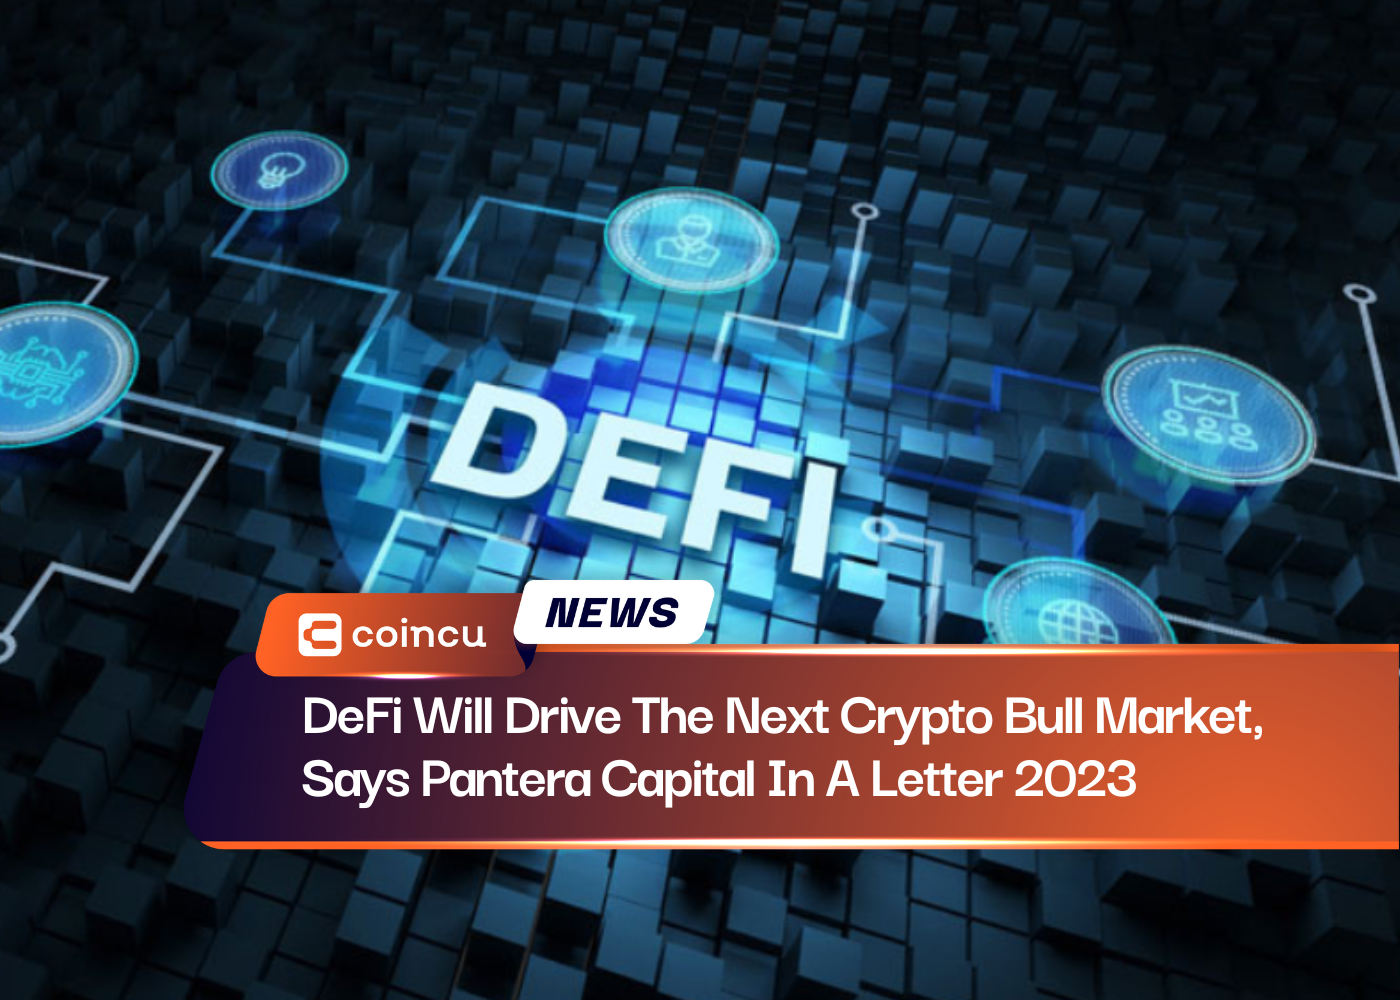 DeFi Will Drive The Next Crypto Bull Market, Says Pantera Capital In A Letter 2023